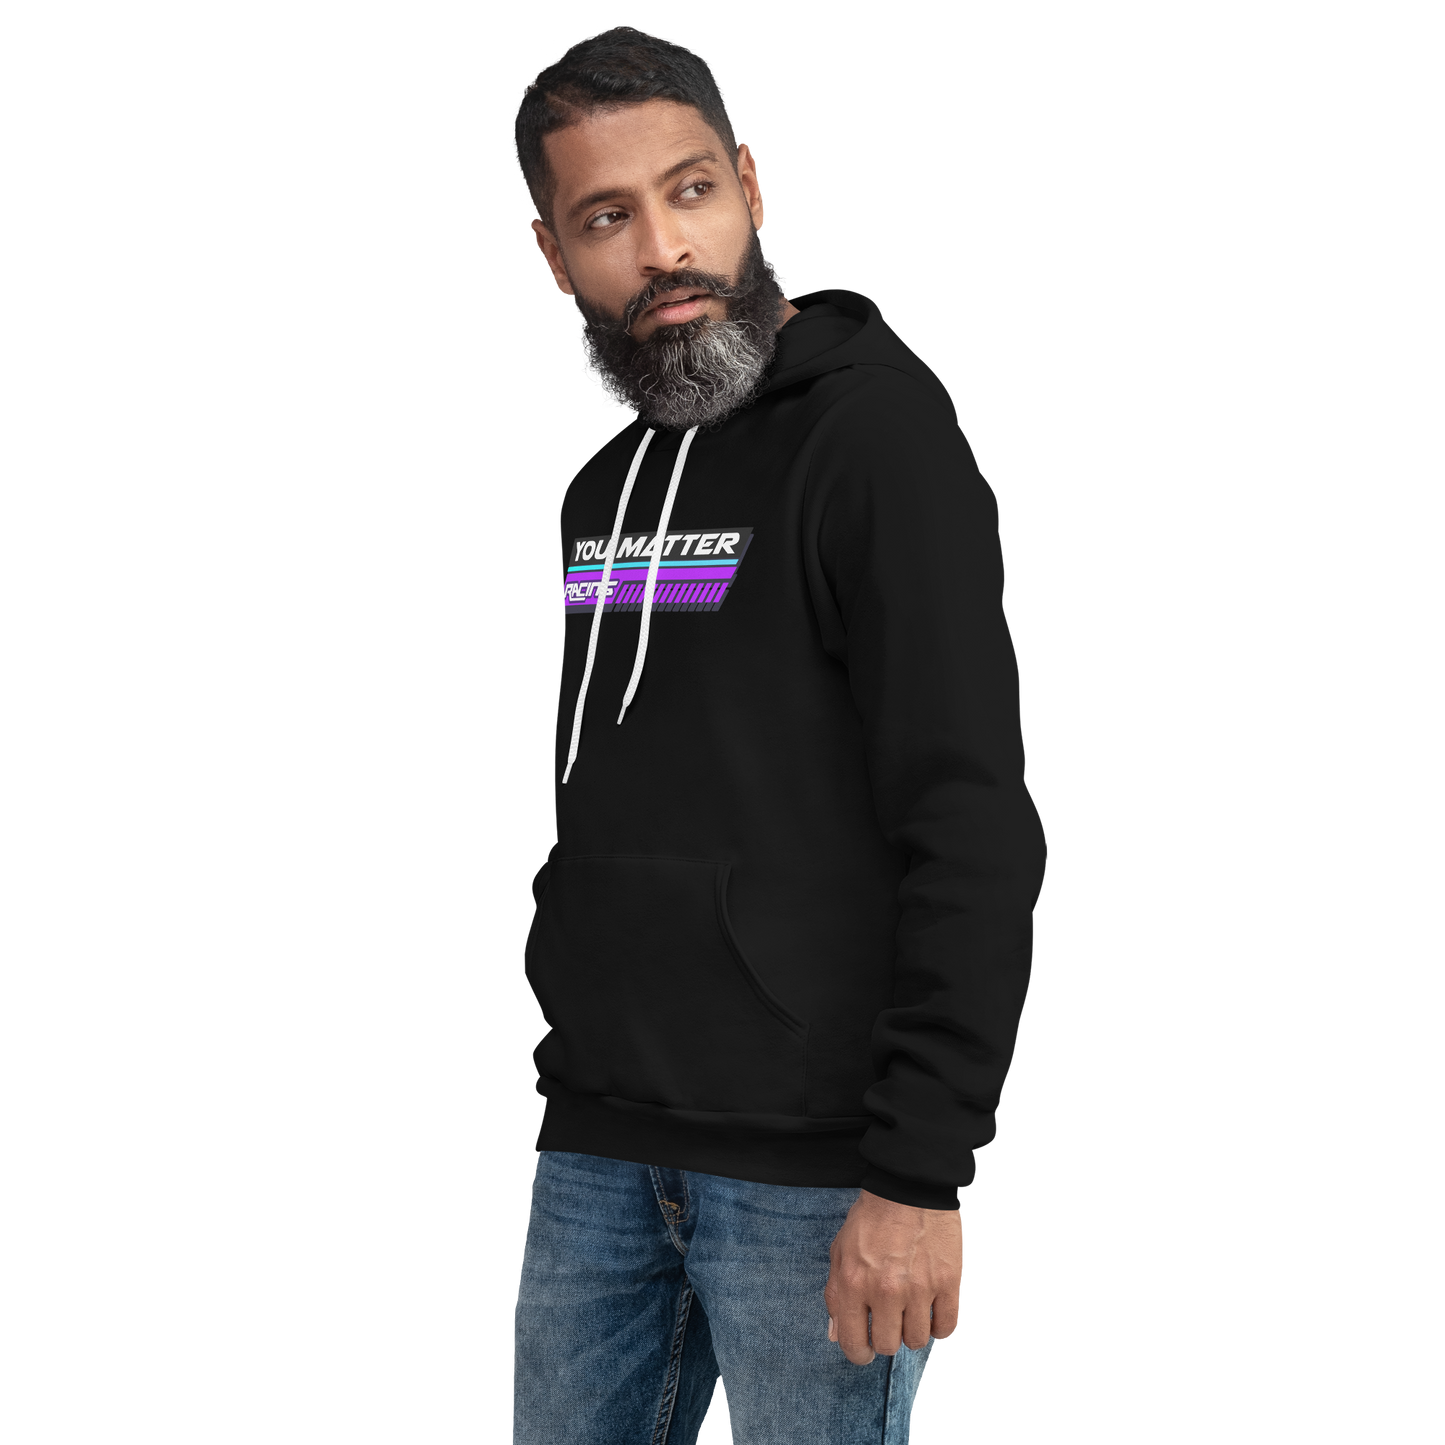 Adult It's Kody B 'You Matter' Pullover Hoodie